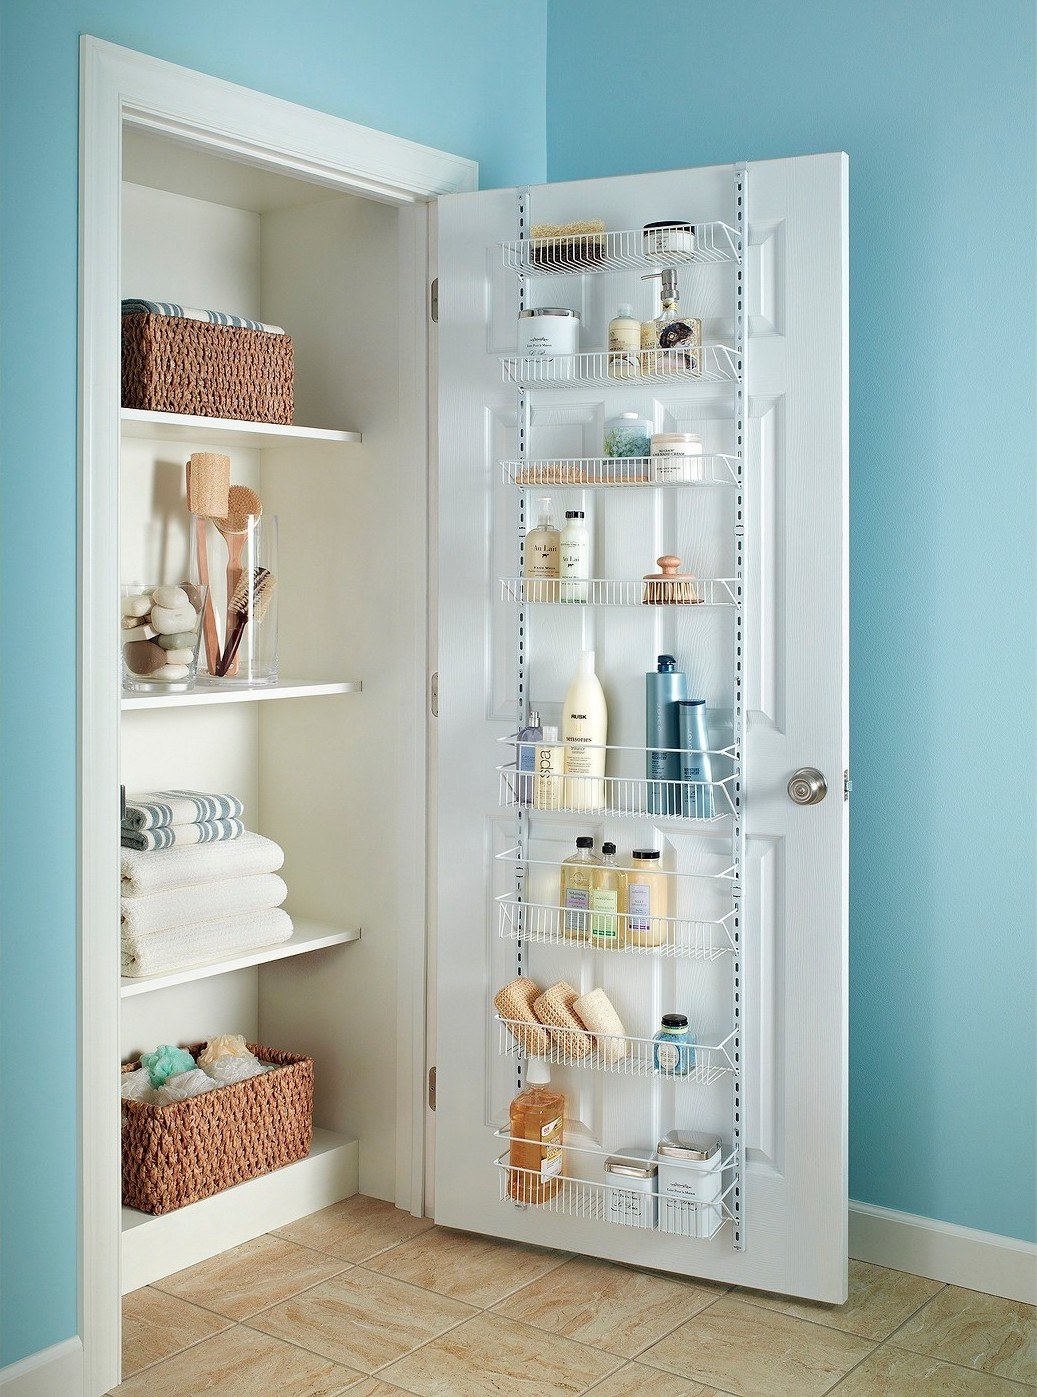 The rack attached to the inside of a linen closet door and stocked with products